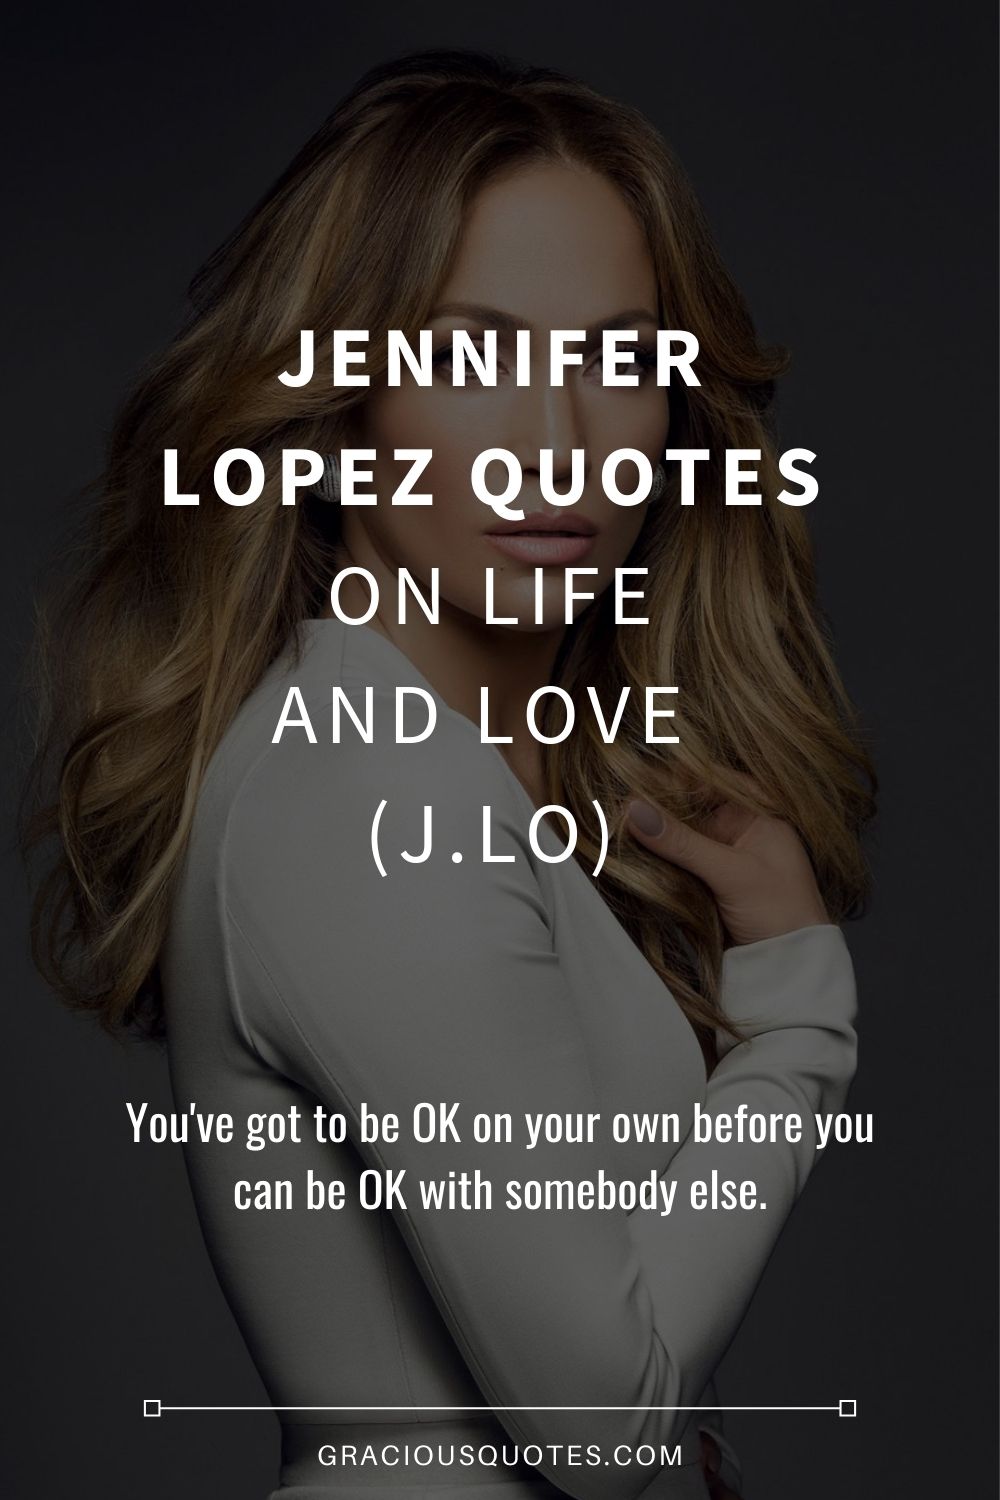 Jennifer Lopez Quotes on Life and Love (J.LO) - Gracious Quotes